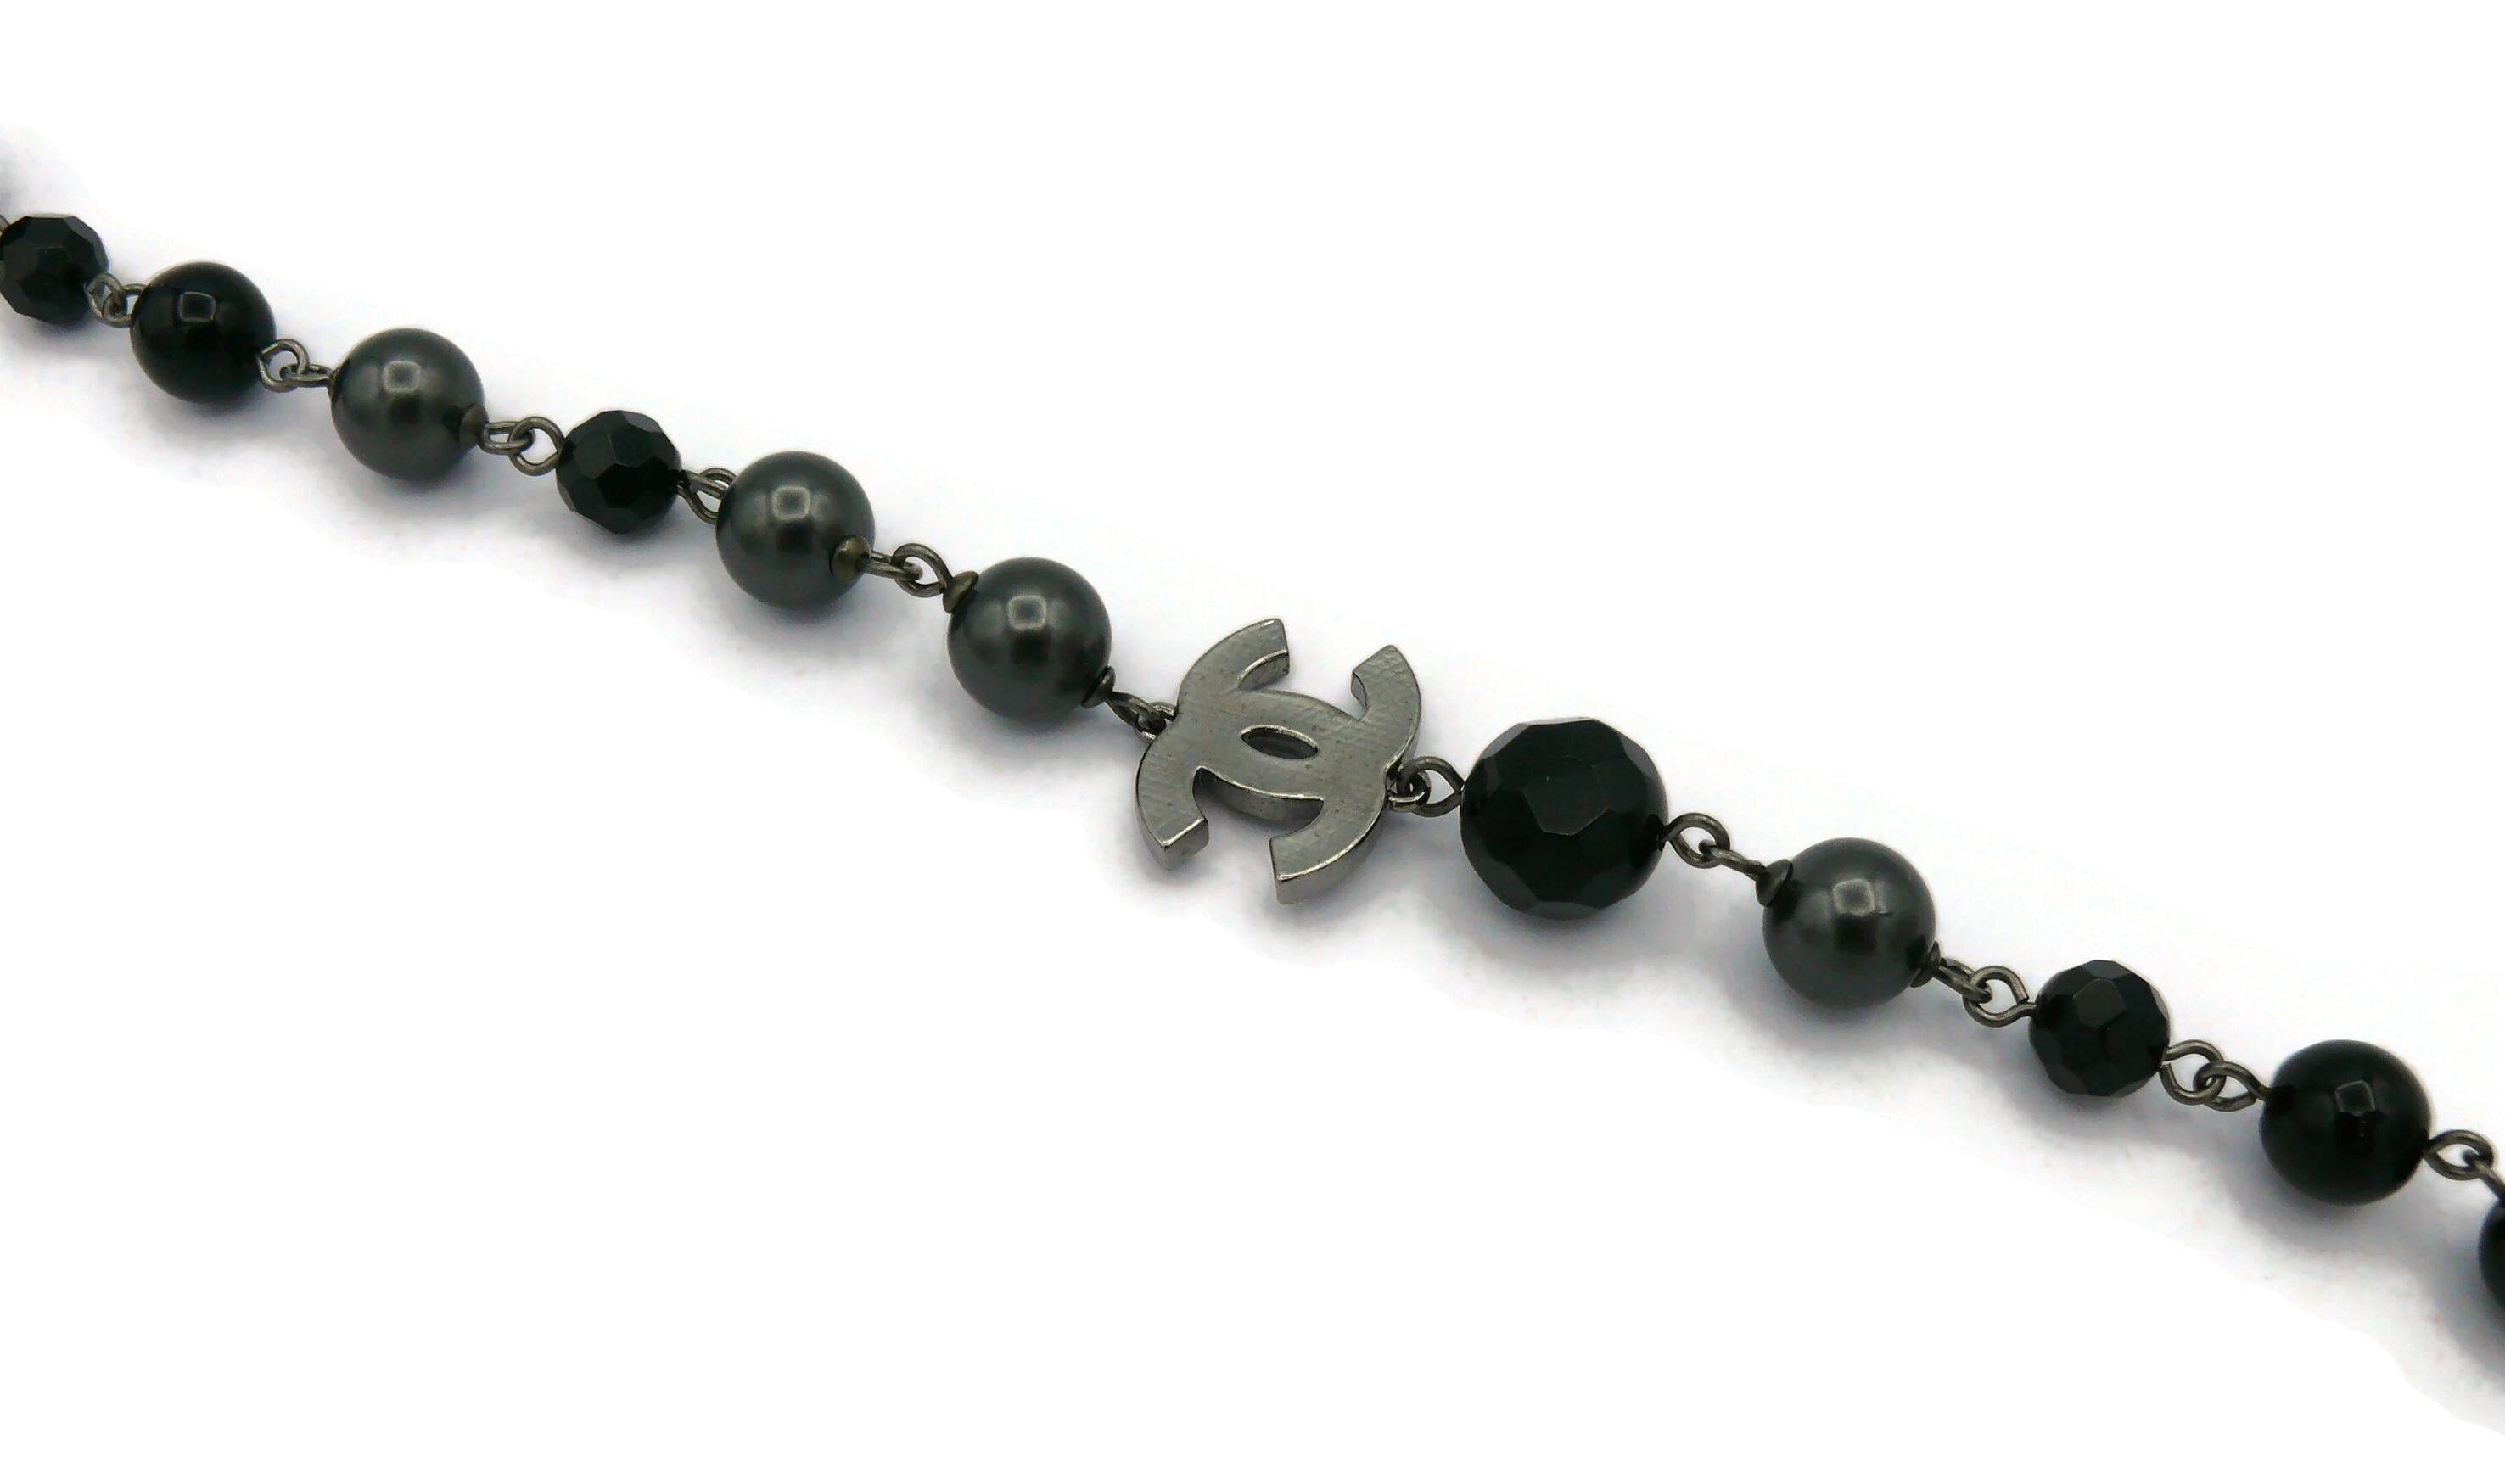 CHANEL by KARL LAGERFELD 2010 Grey Pearl and Black Bead CC Necklace For Sale 6